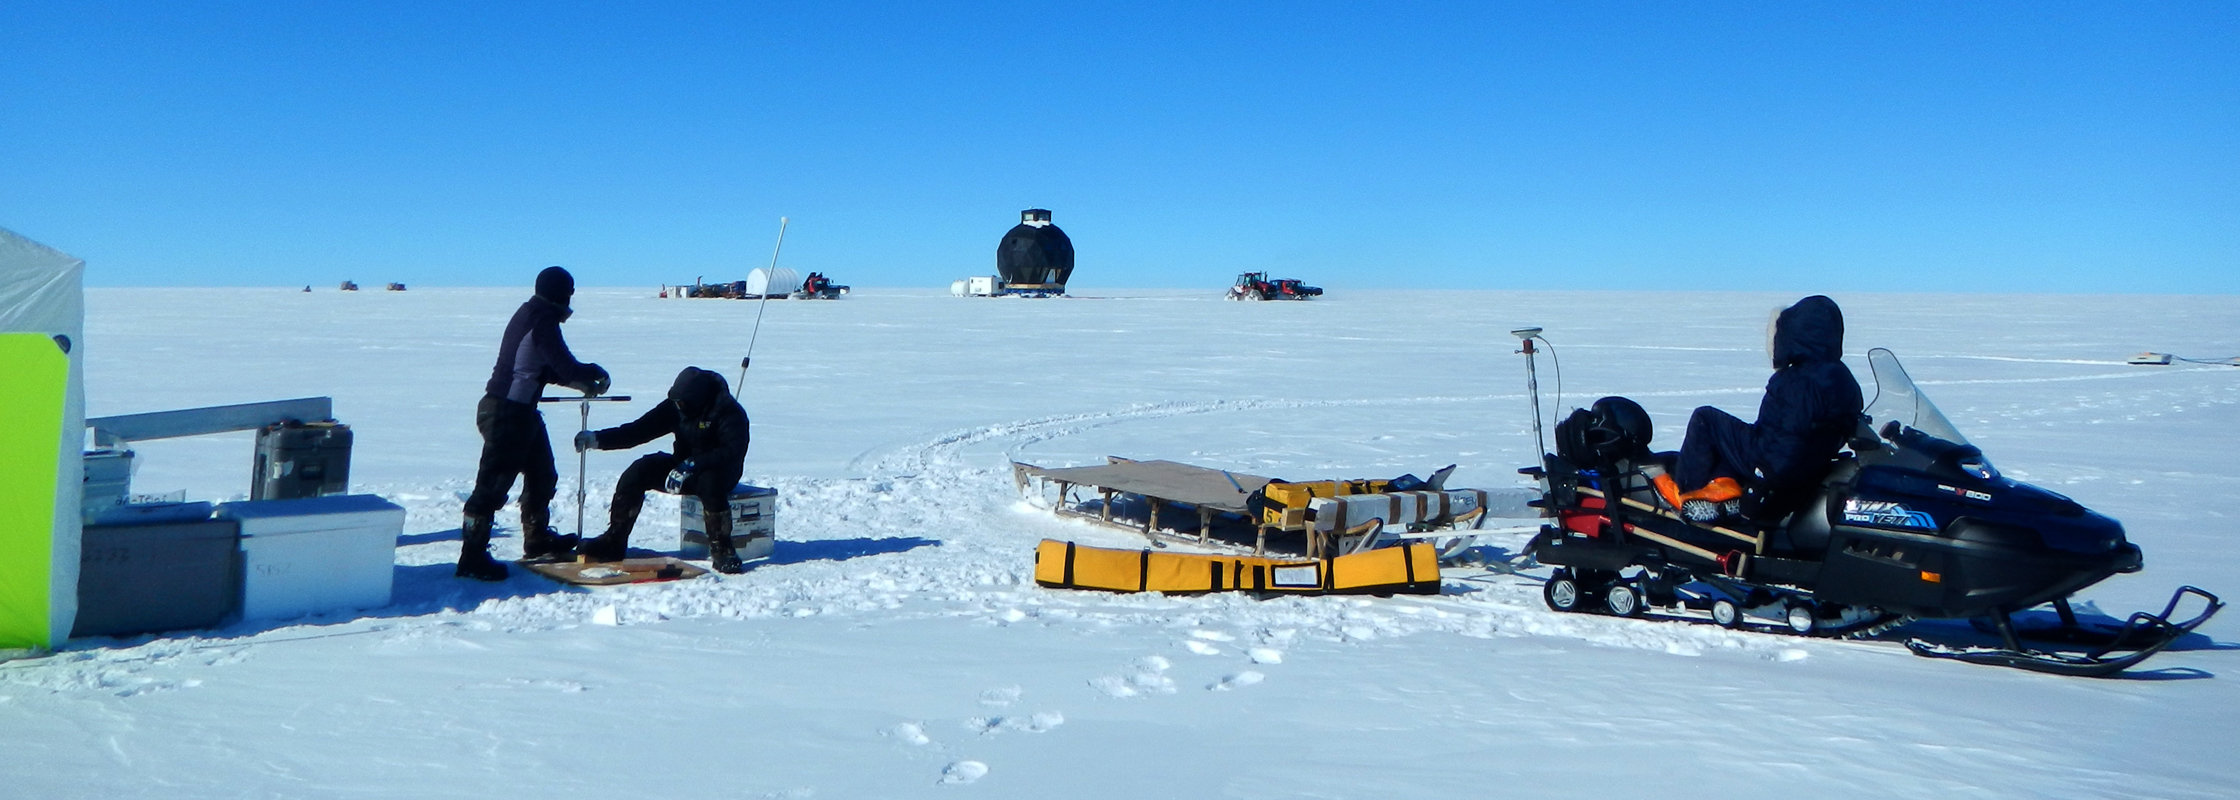 Helle and Paul are taking snow samples, while Anna is watching the traverse train go by. To the right the snowmobile with radar equipment is seen